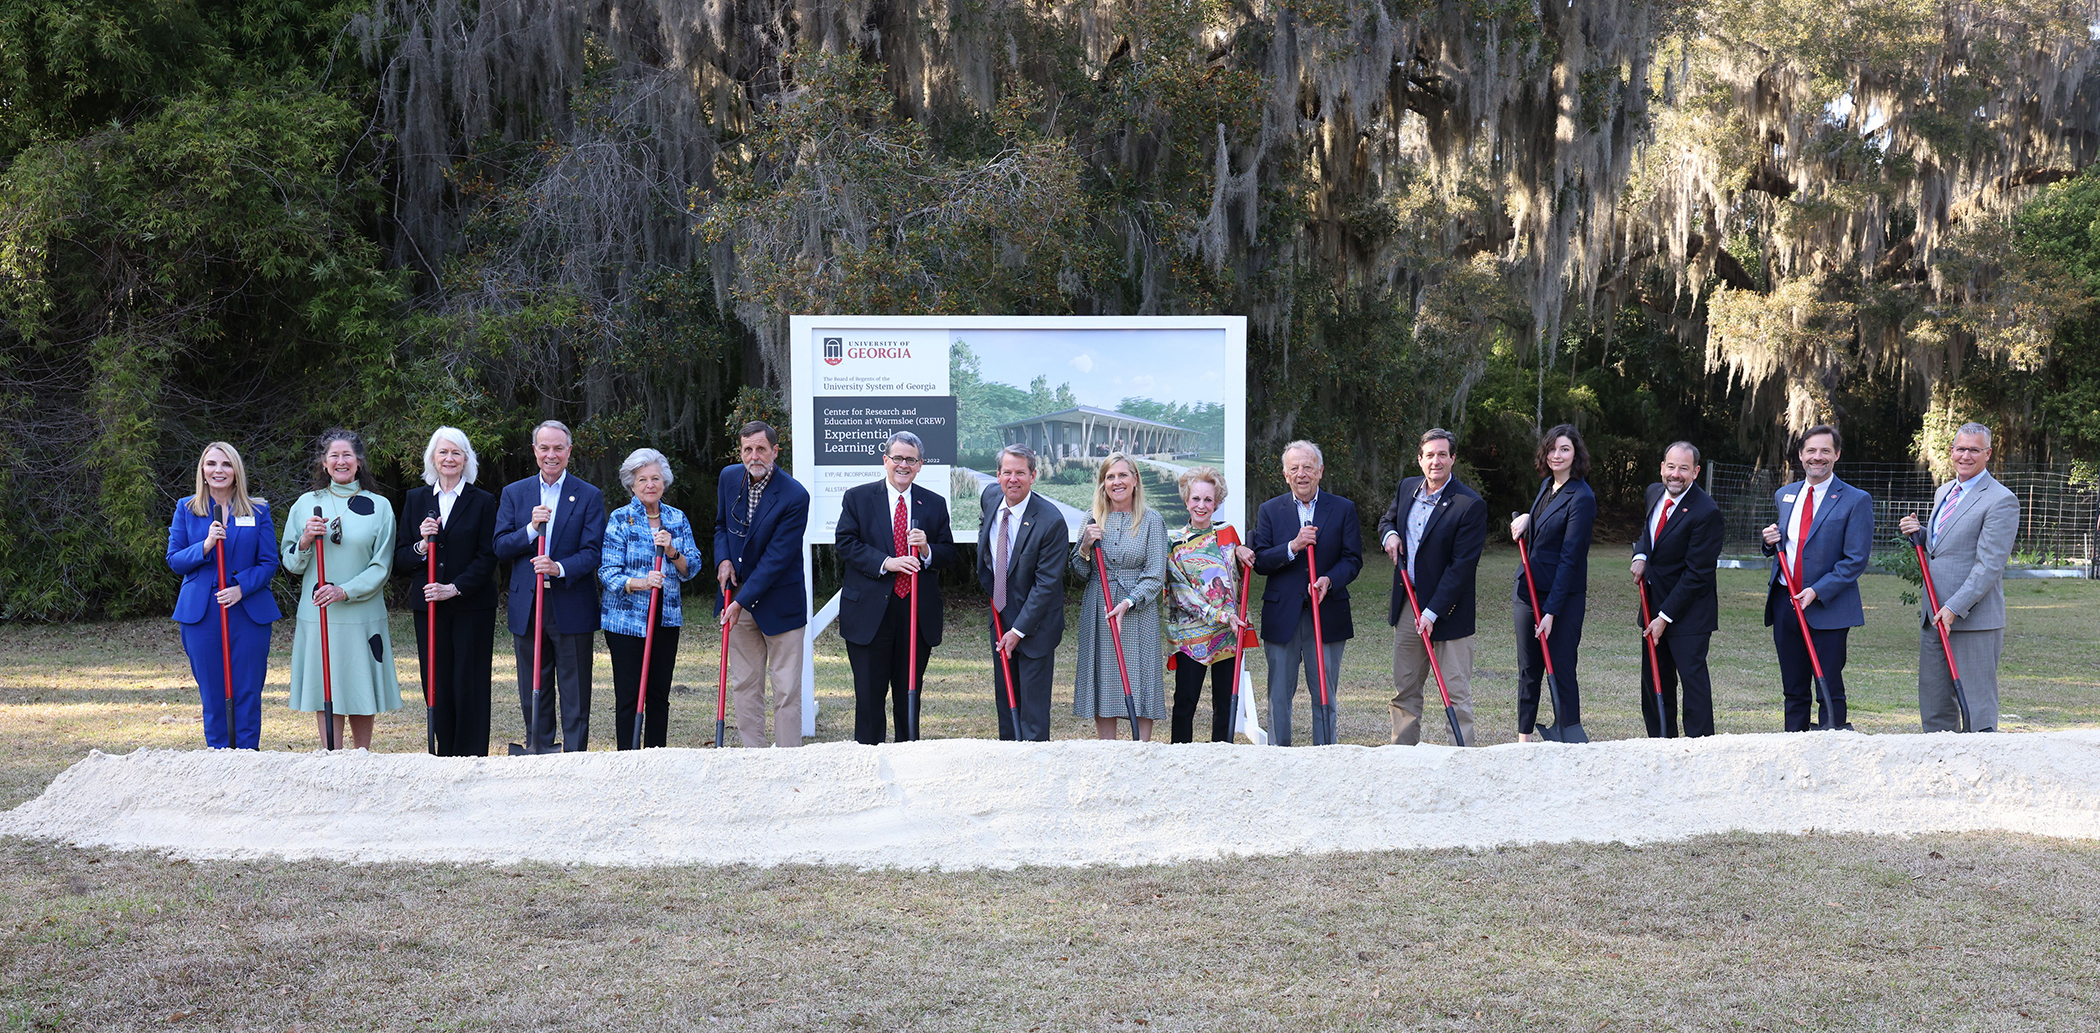 UGA President Morehead, Governor Kemp and others pose in groundbreaking ceremony